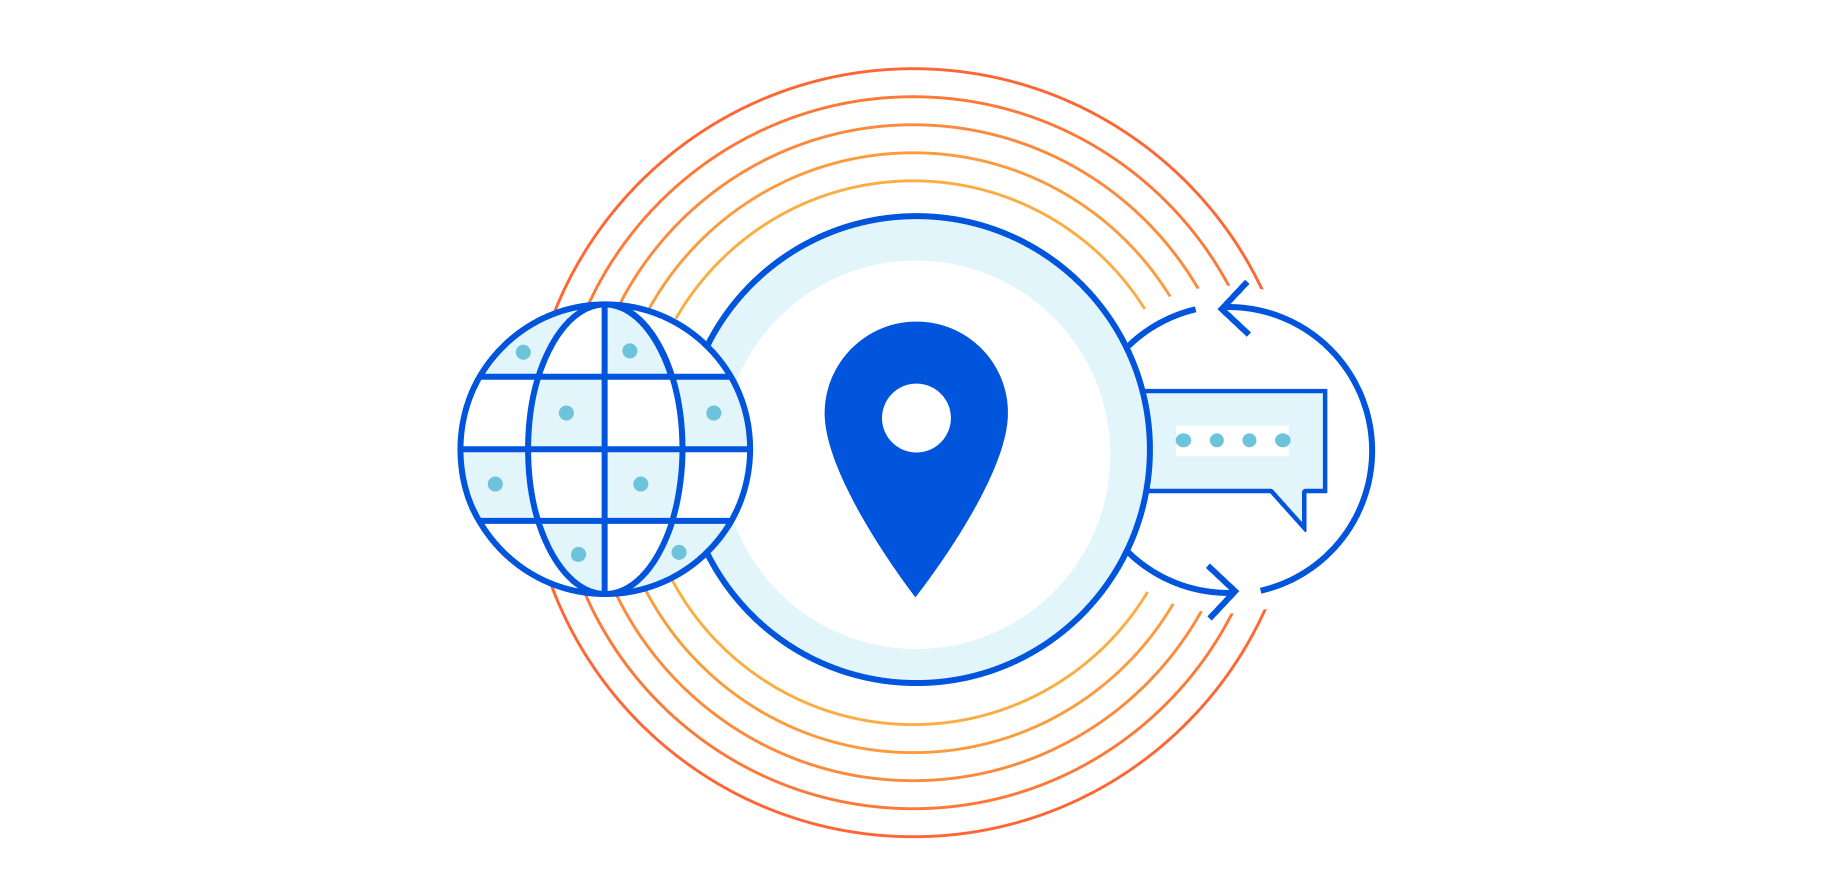 Location-based personalization at the edge with Cloudflare Workers